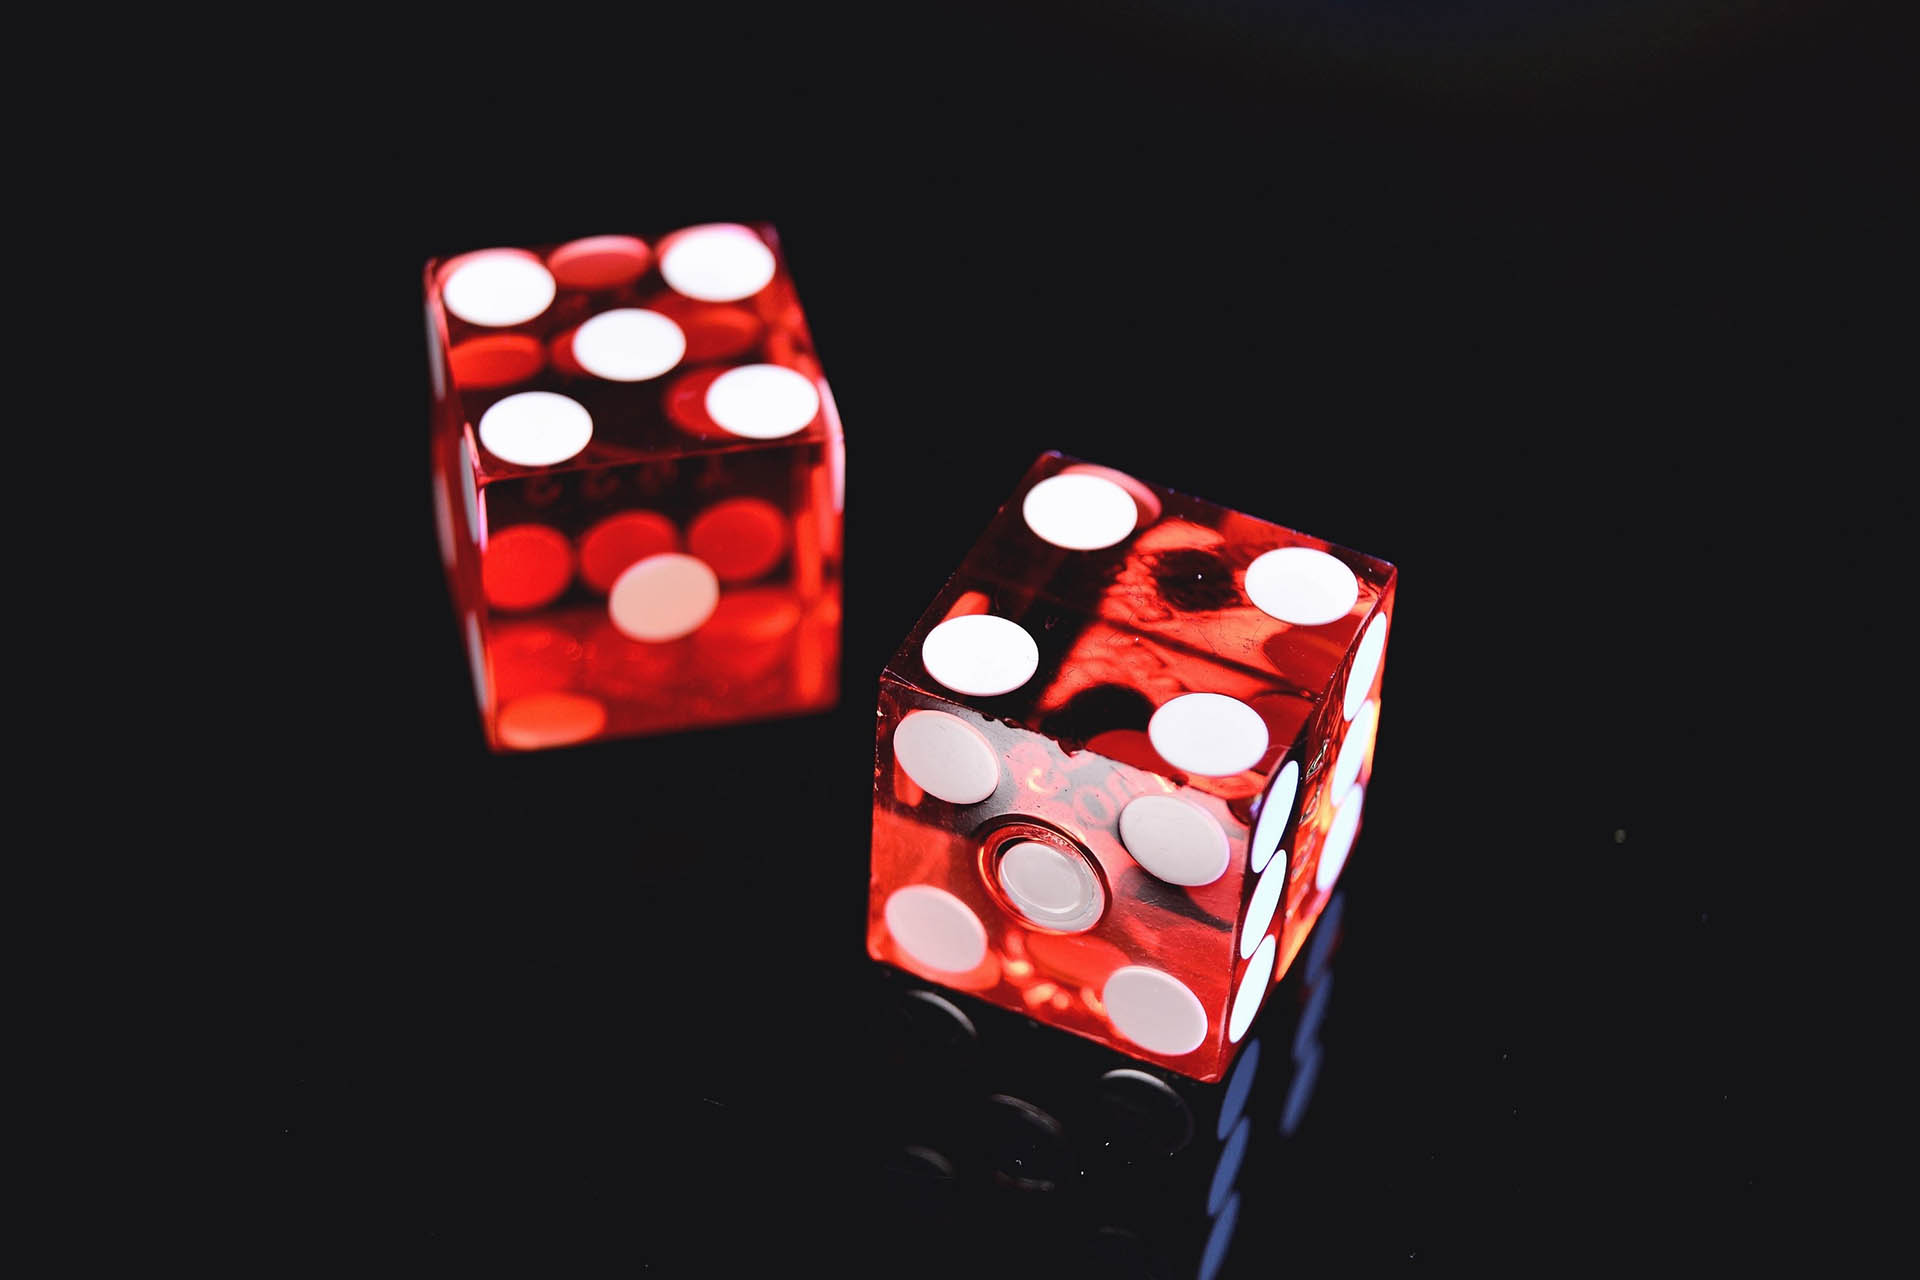 t2informatik Blog: And he does play dice...